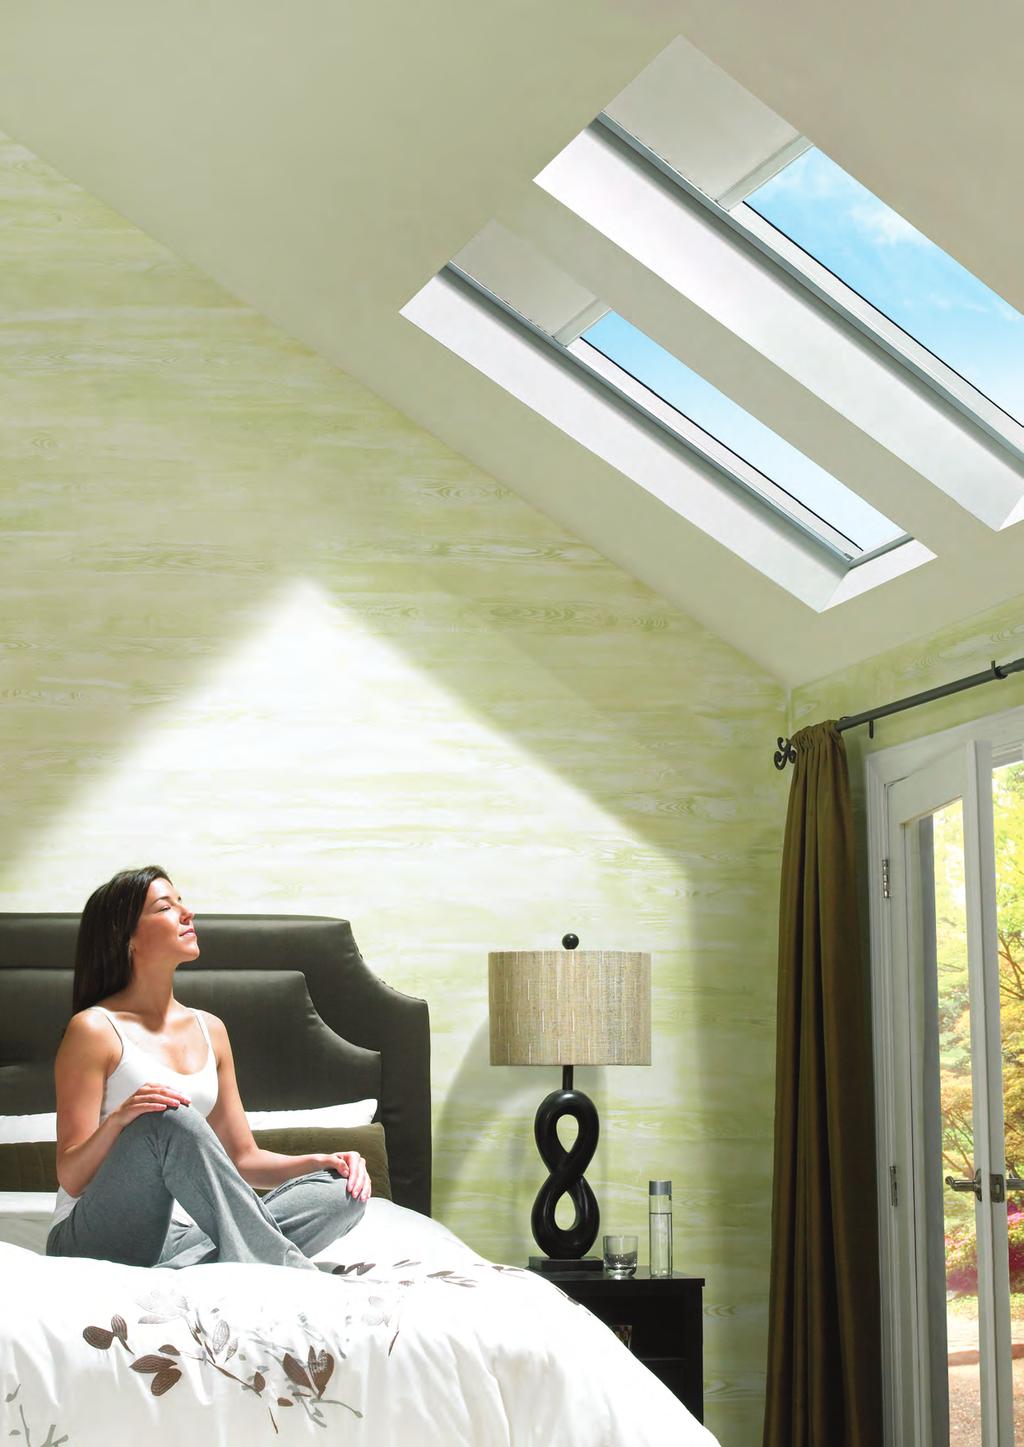 Available from April 2014 80% HEAT BLOCK Advanced glazing technology blocks approx 80% of radiant heat (complete window calc.) and 99% of harmful UV rays.